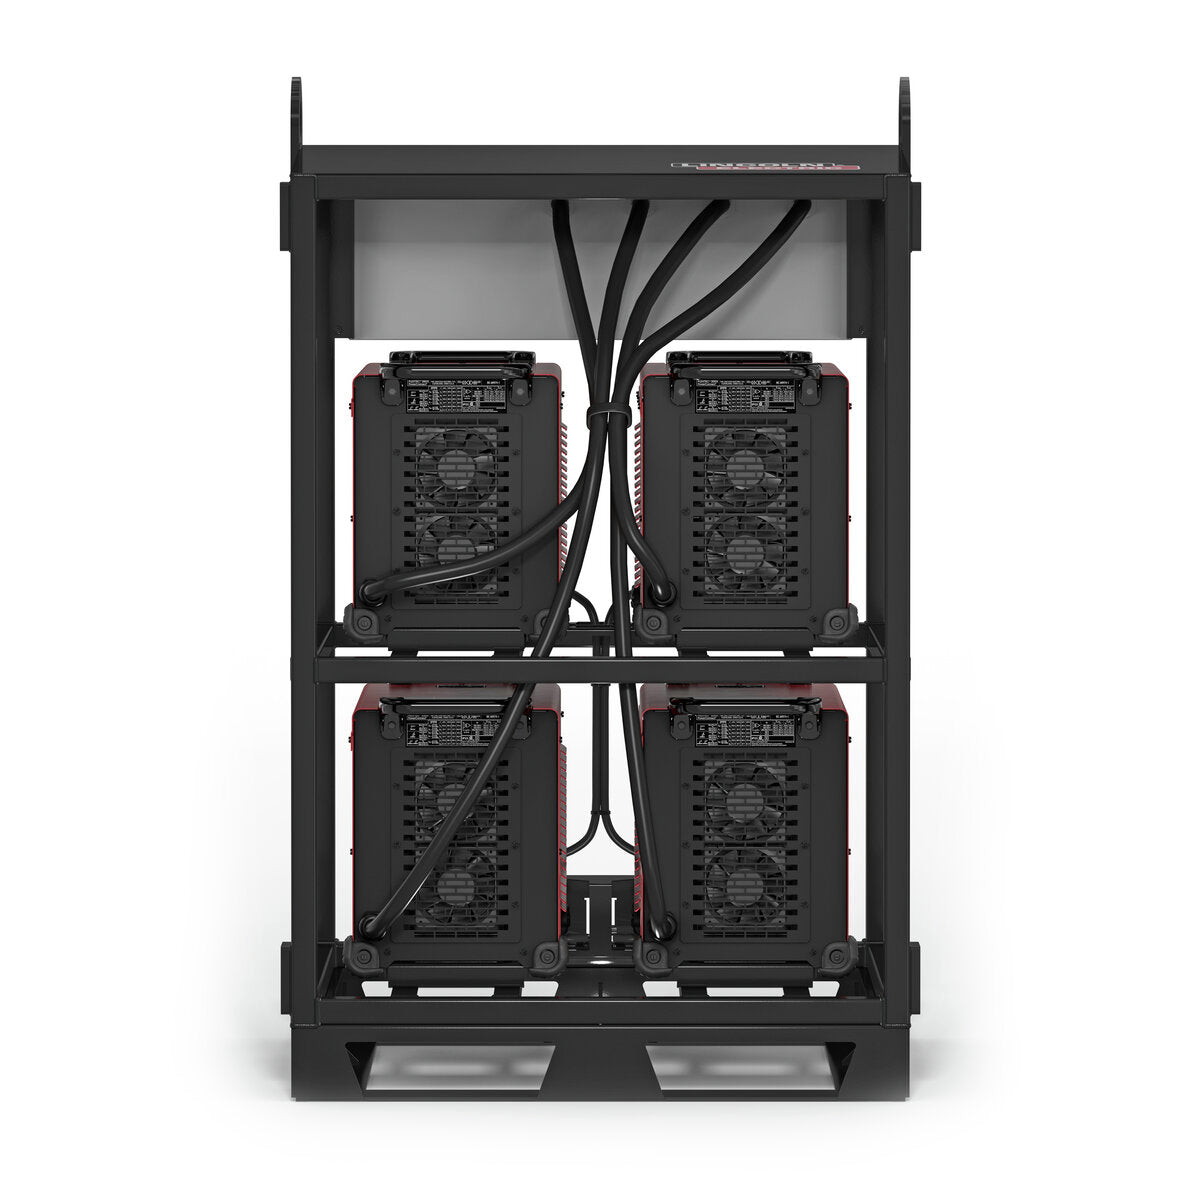 Lincoln Electric - Flextec® 350X PowerConnect® 4-Pack Rack - K4726-1